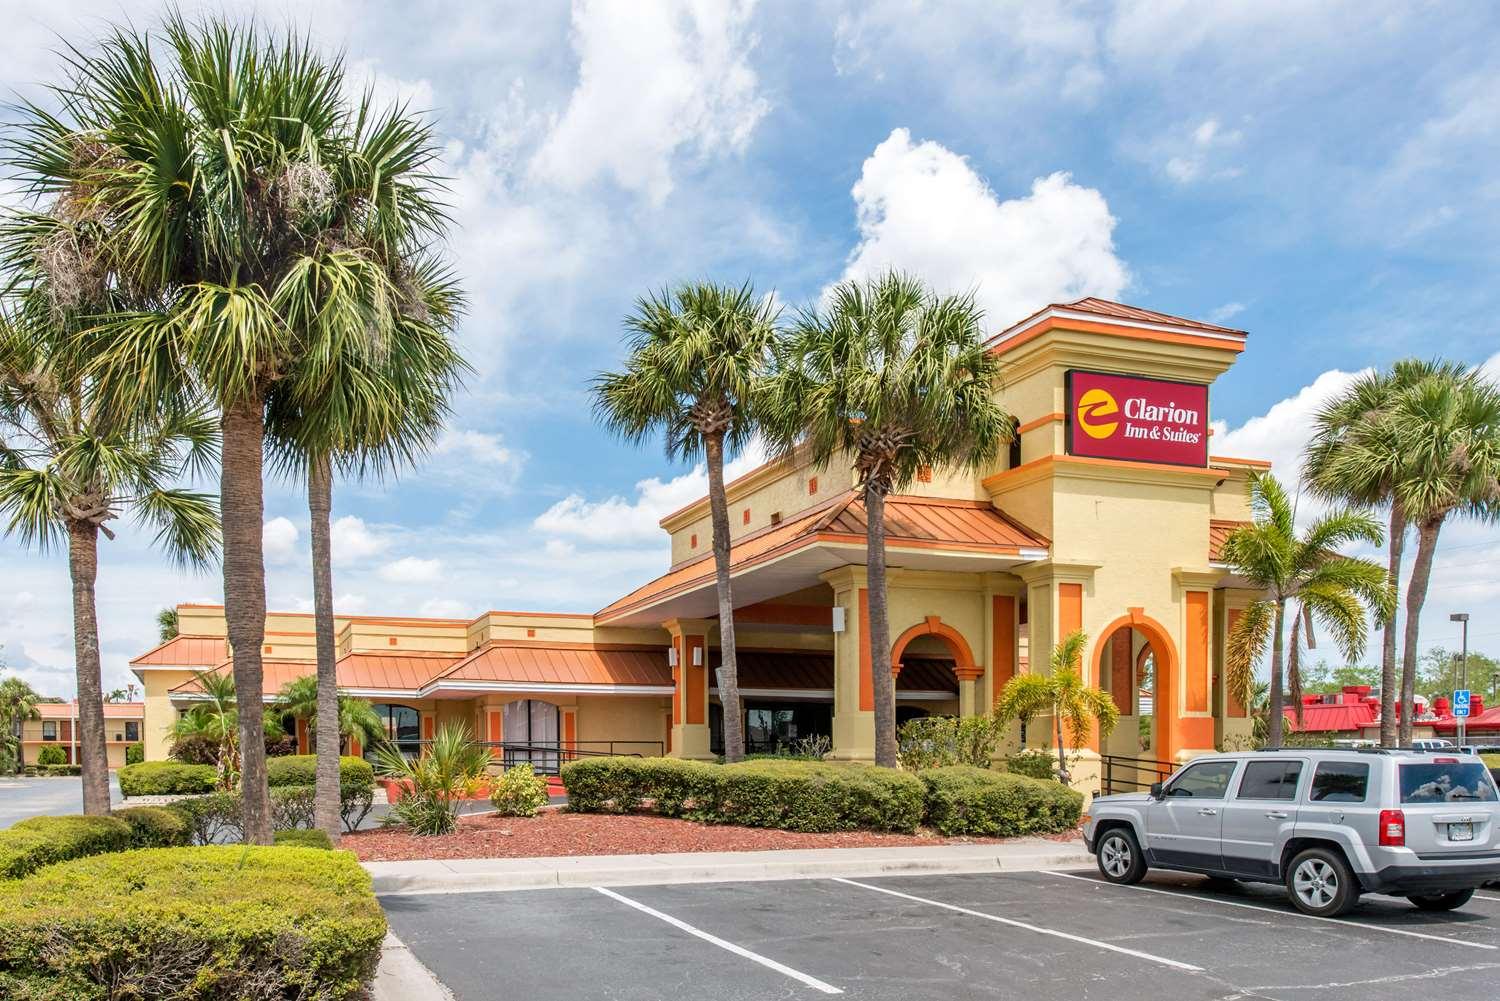 Clarion Inn and Suites in Kissimmee, FL